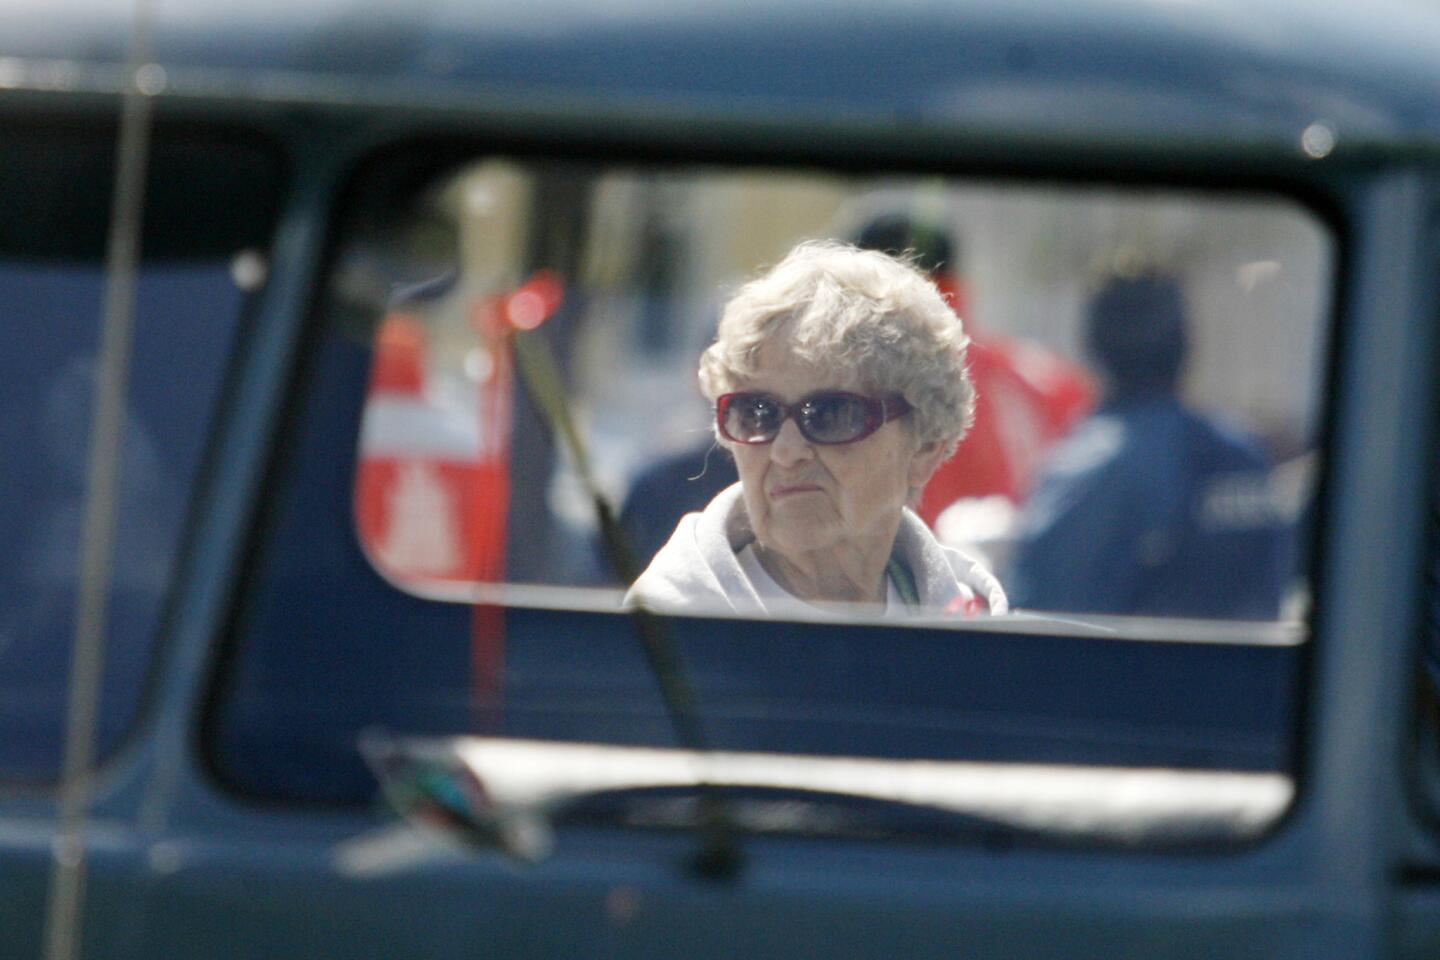 Joan Graves waits before participating in Burbank on Parade, which took place on Olive Ave. between Keystone St. and Lomita St. on Saturday, April 14, 2012.